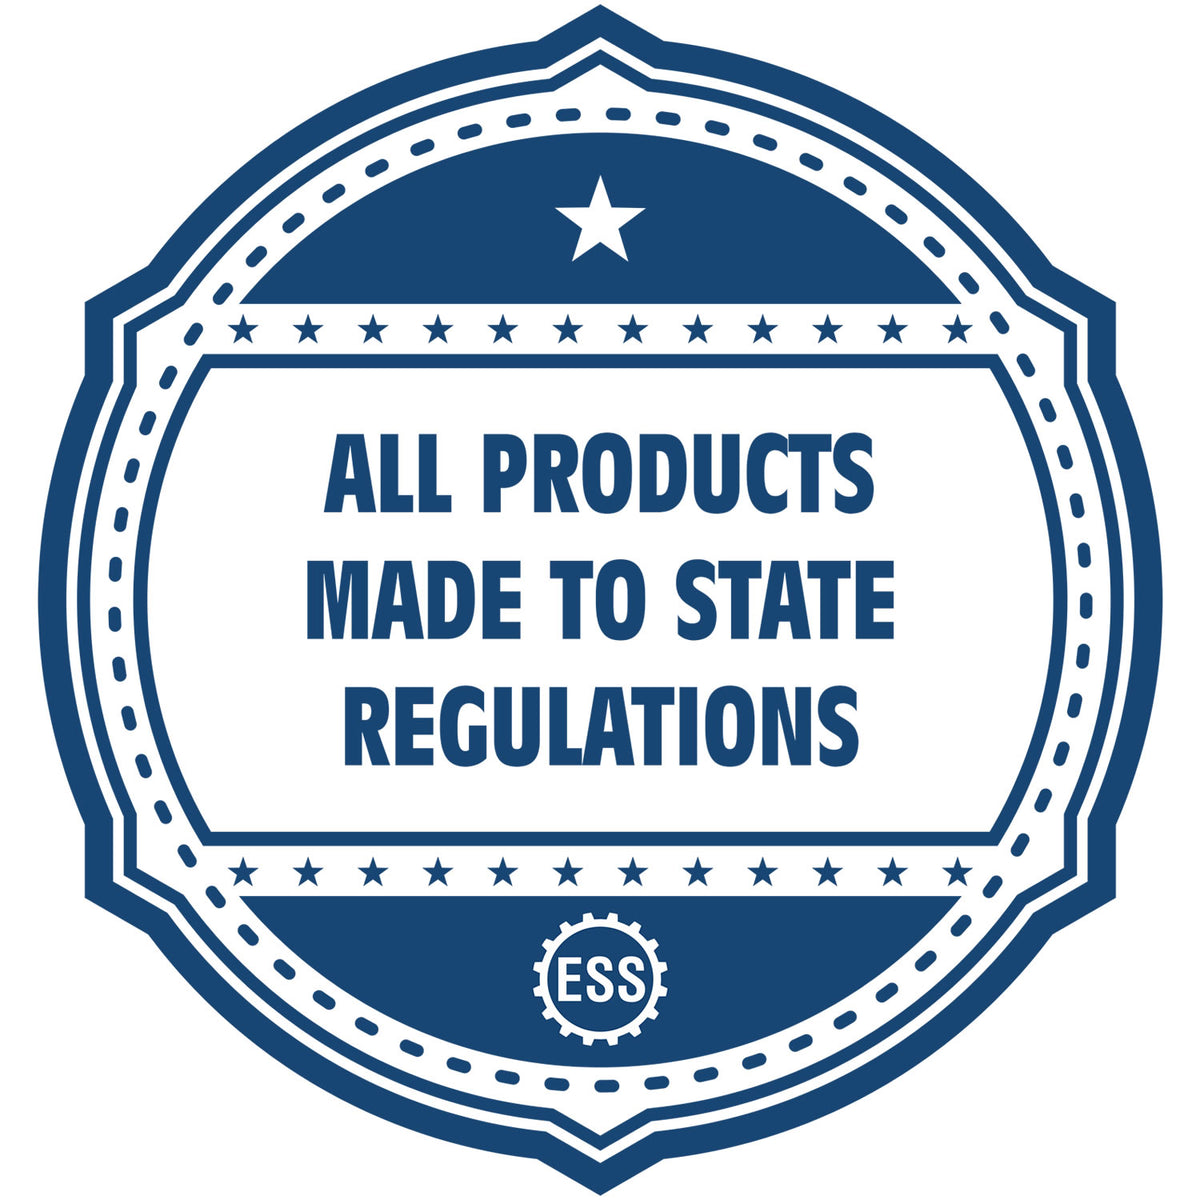 A blue icon or badge for the Hybrid Oklahoma Architect Seal showing that this product is made in compliance with state regulations.